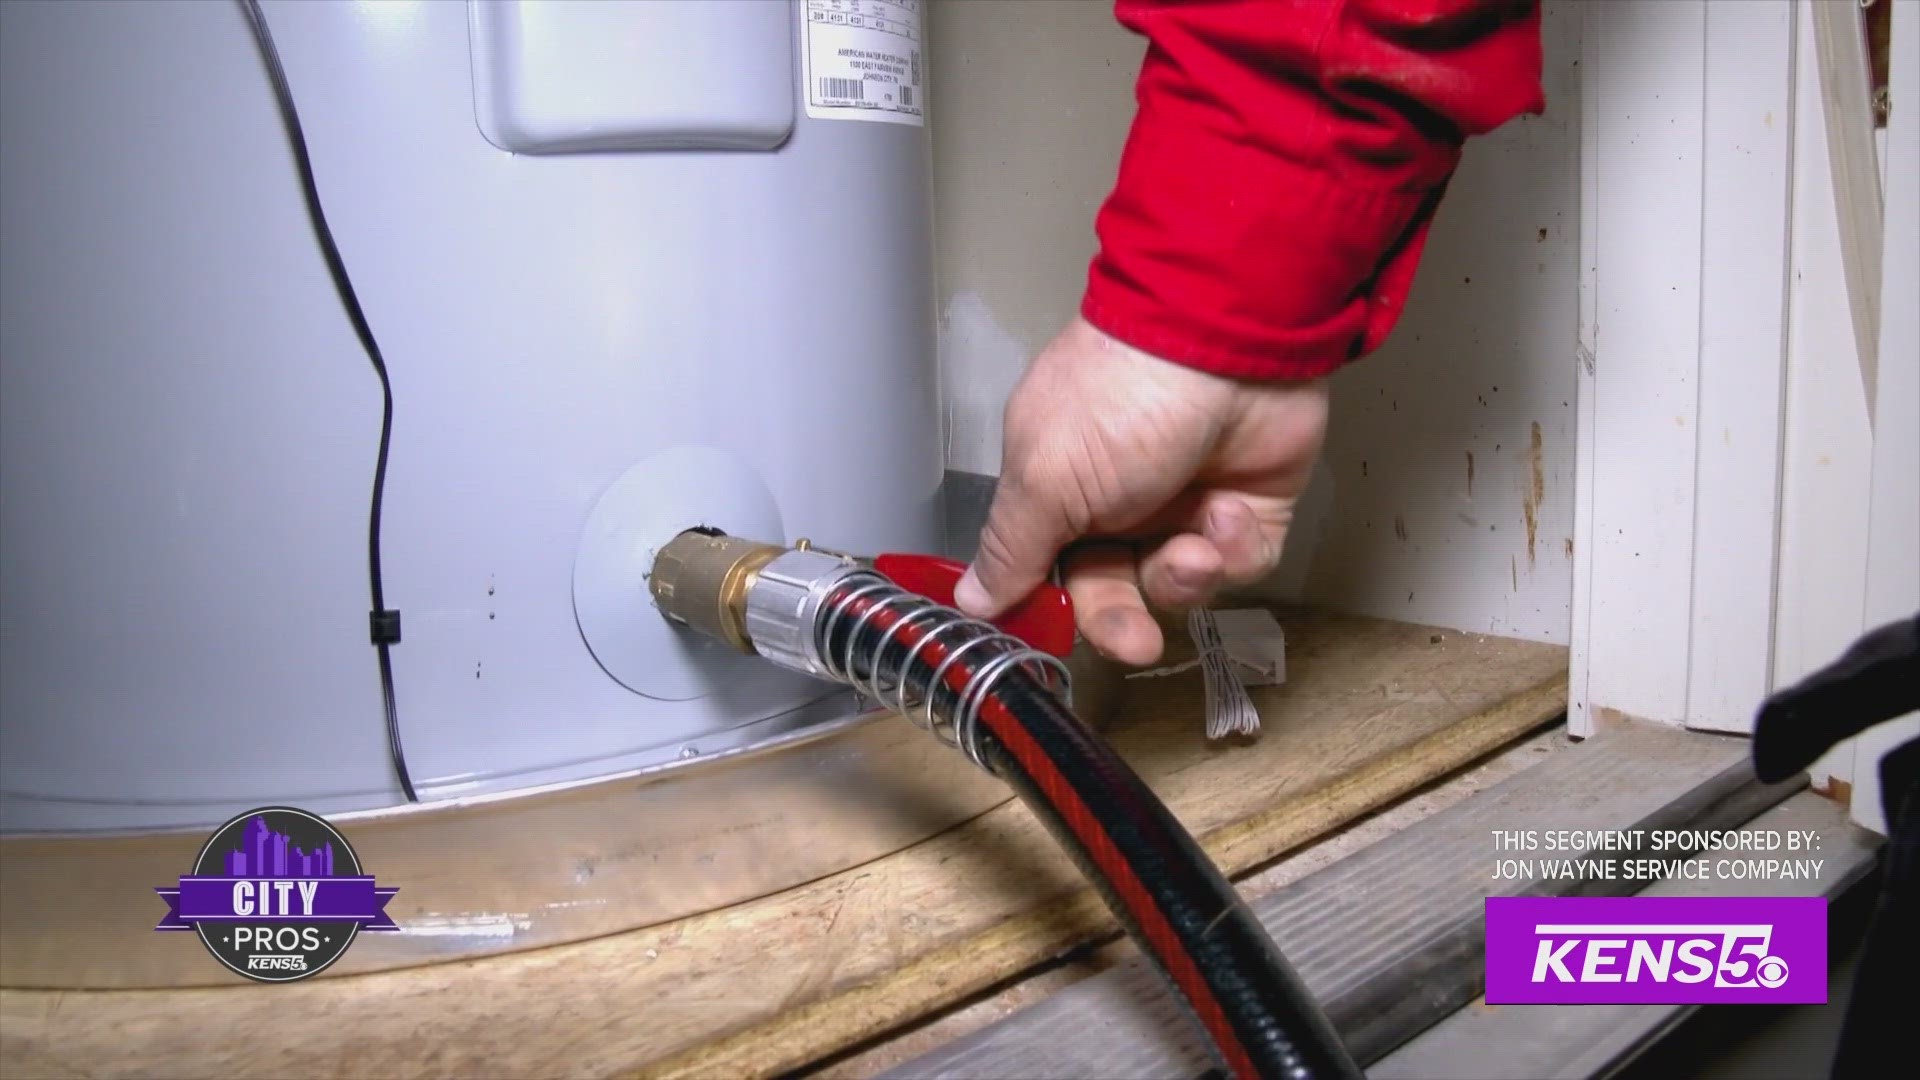 Keeping your water heater up to current standards . [Sponsored by: Jon Wayne Service Company]